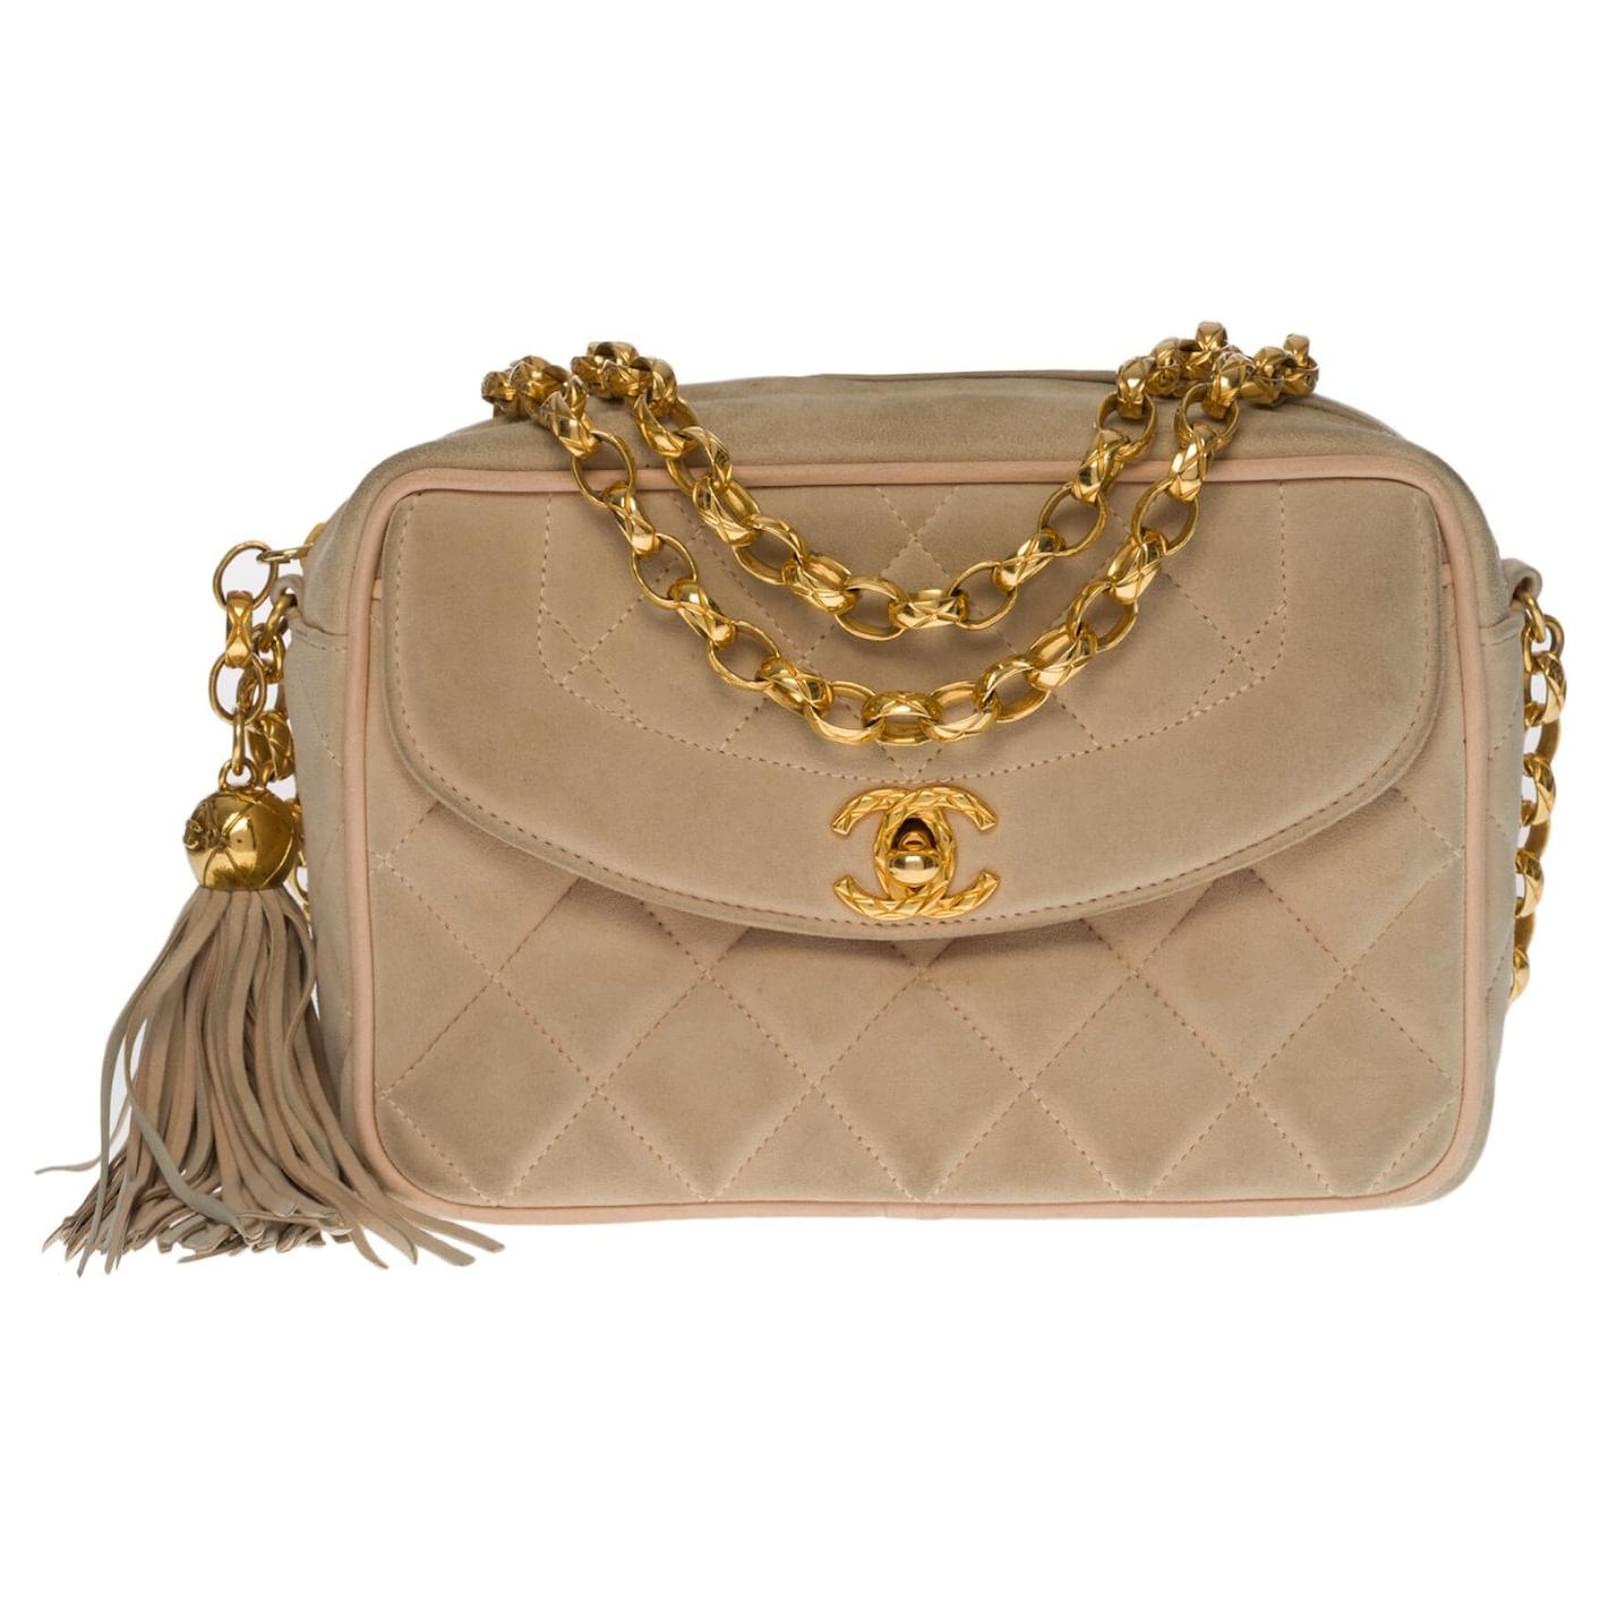 Chanel Beige Quilted Leather Vintage Camera Bag Chanel | The Luxury Closet